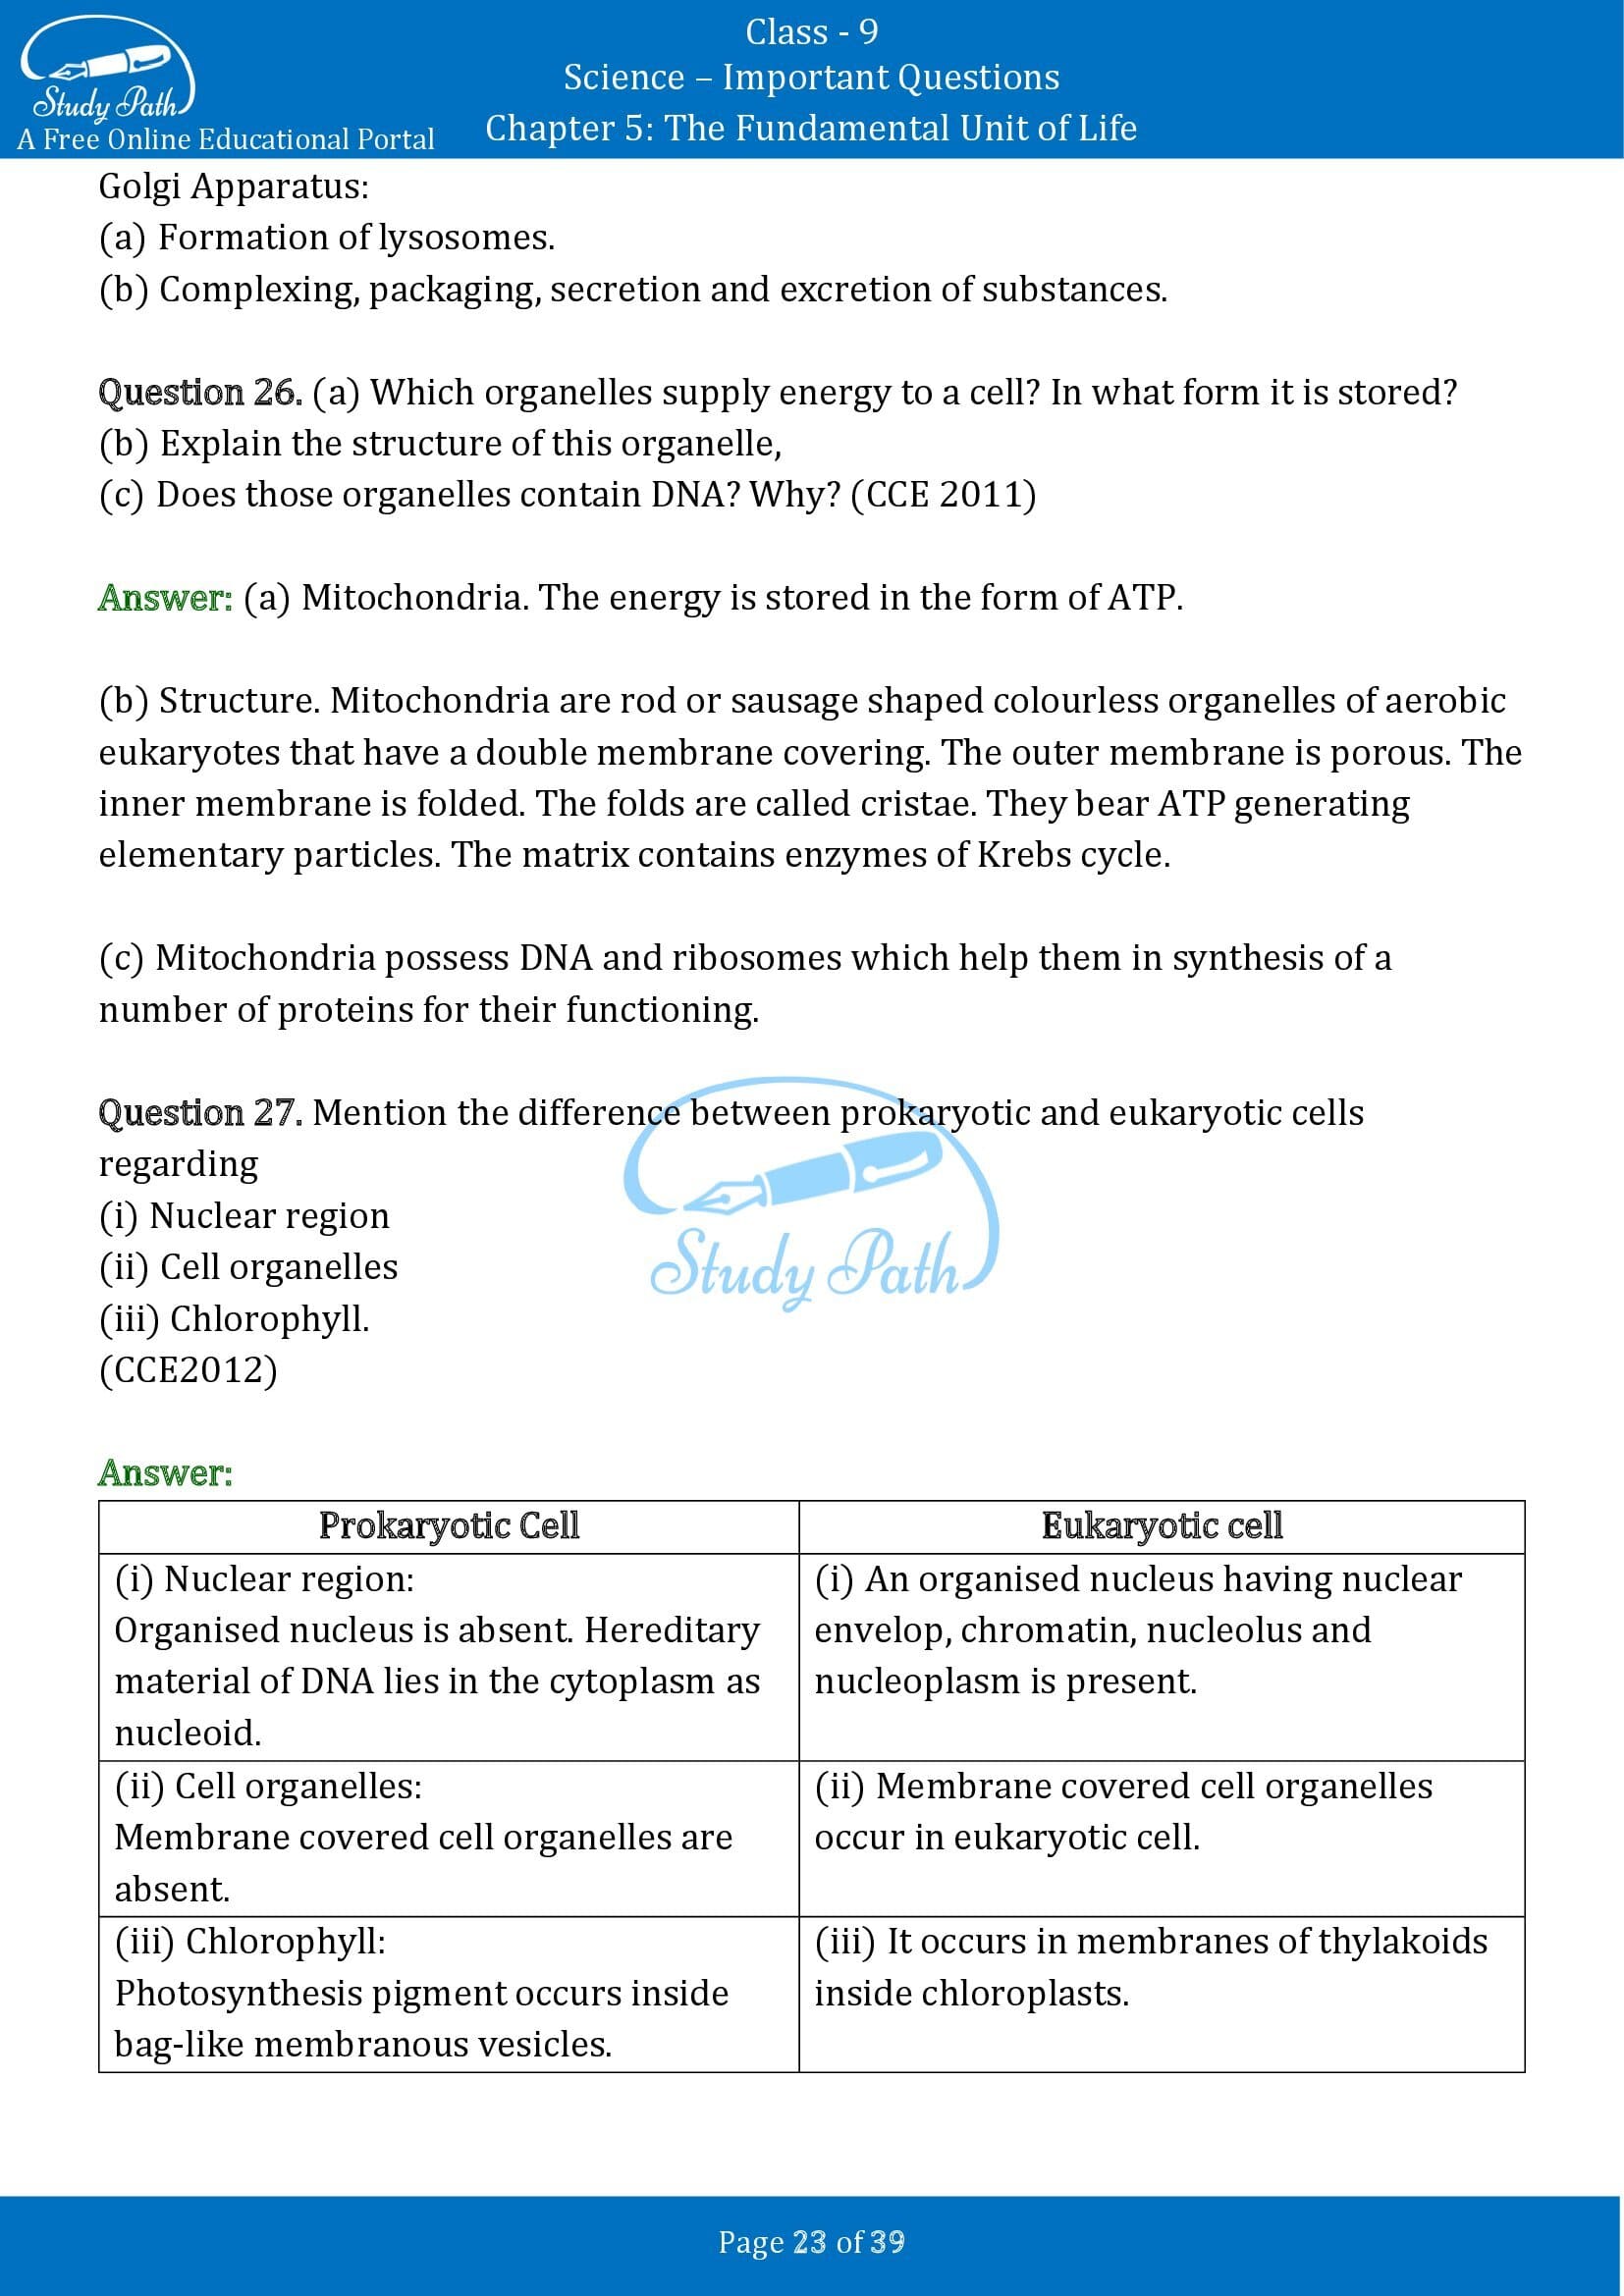 Important Questions for Class 9 Science Chapter 5 The Fundamental Unit of Life 00023